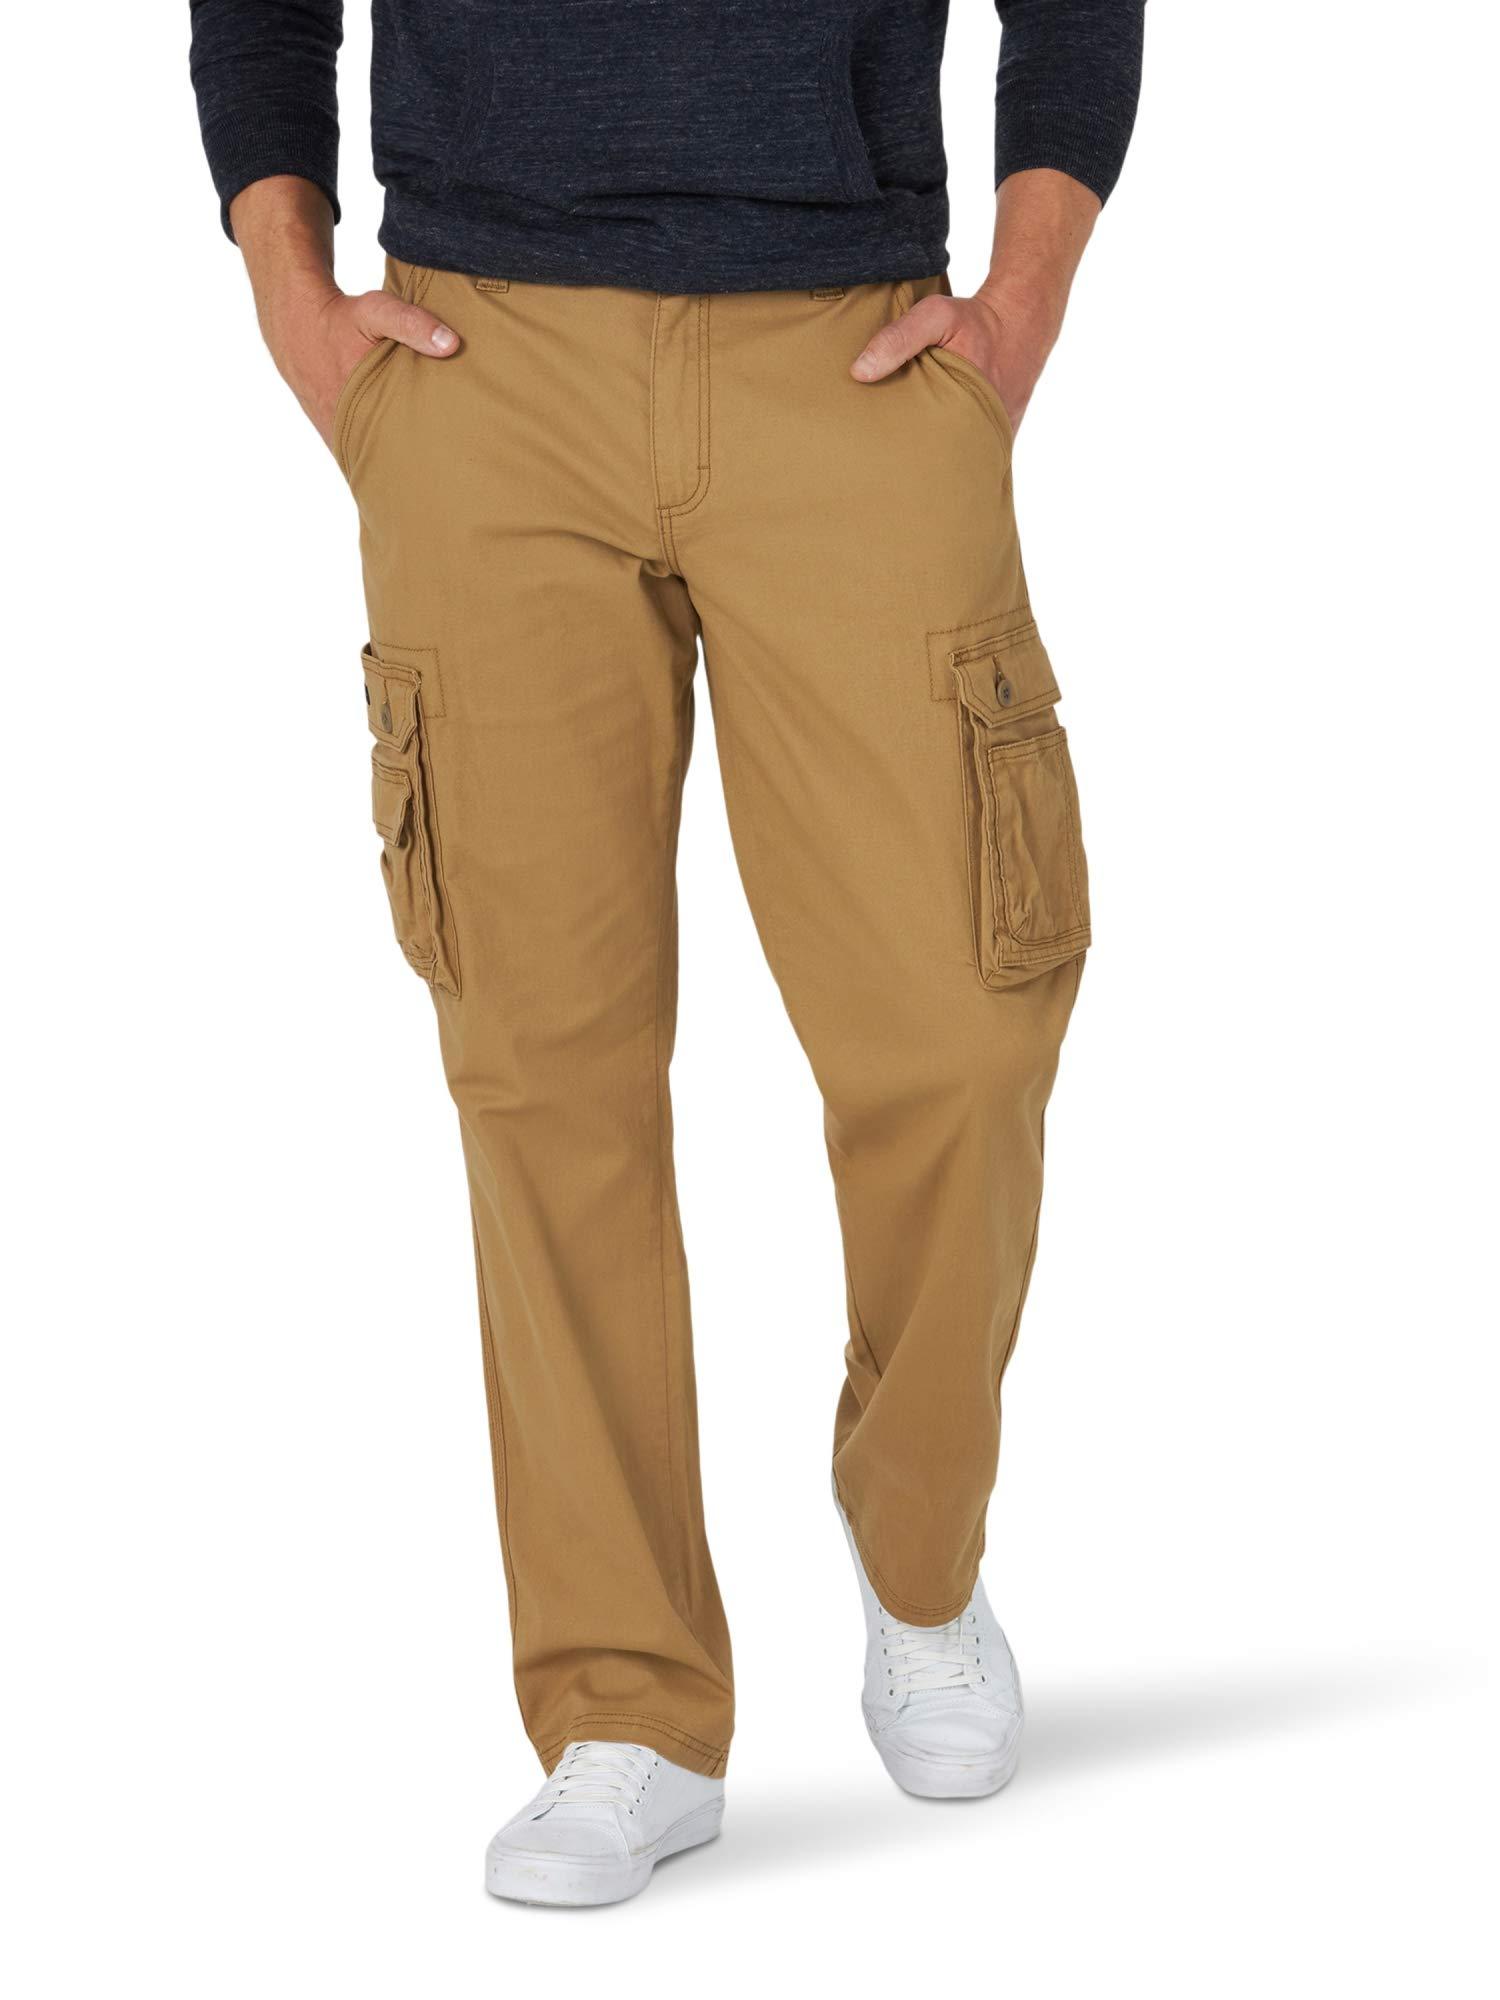 Lee Jeans Cotton Wyoming Relaxed Fit Cargo Pant in Natural for Men - Lyst